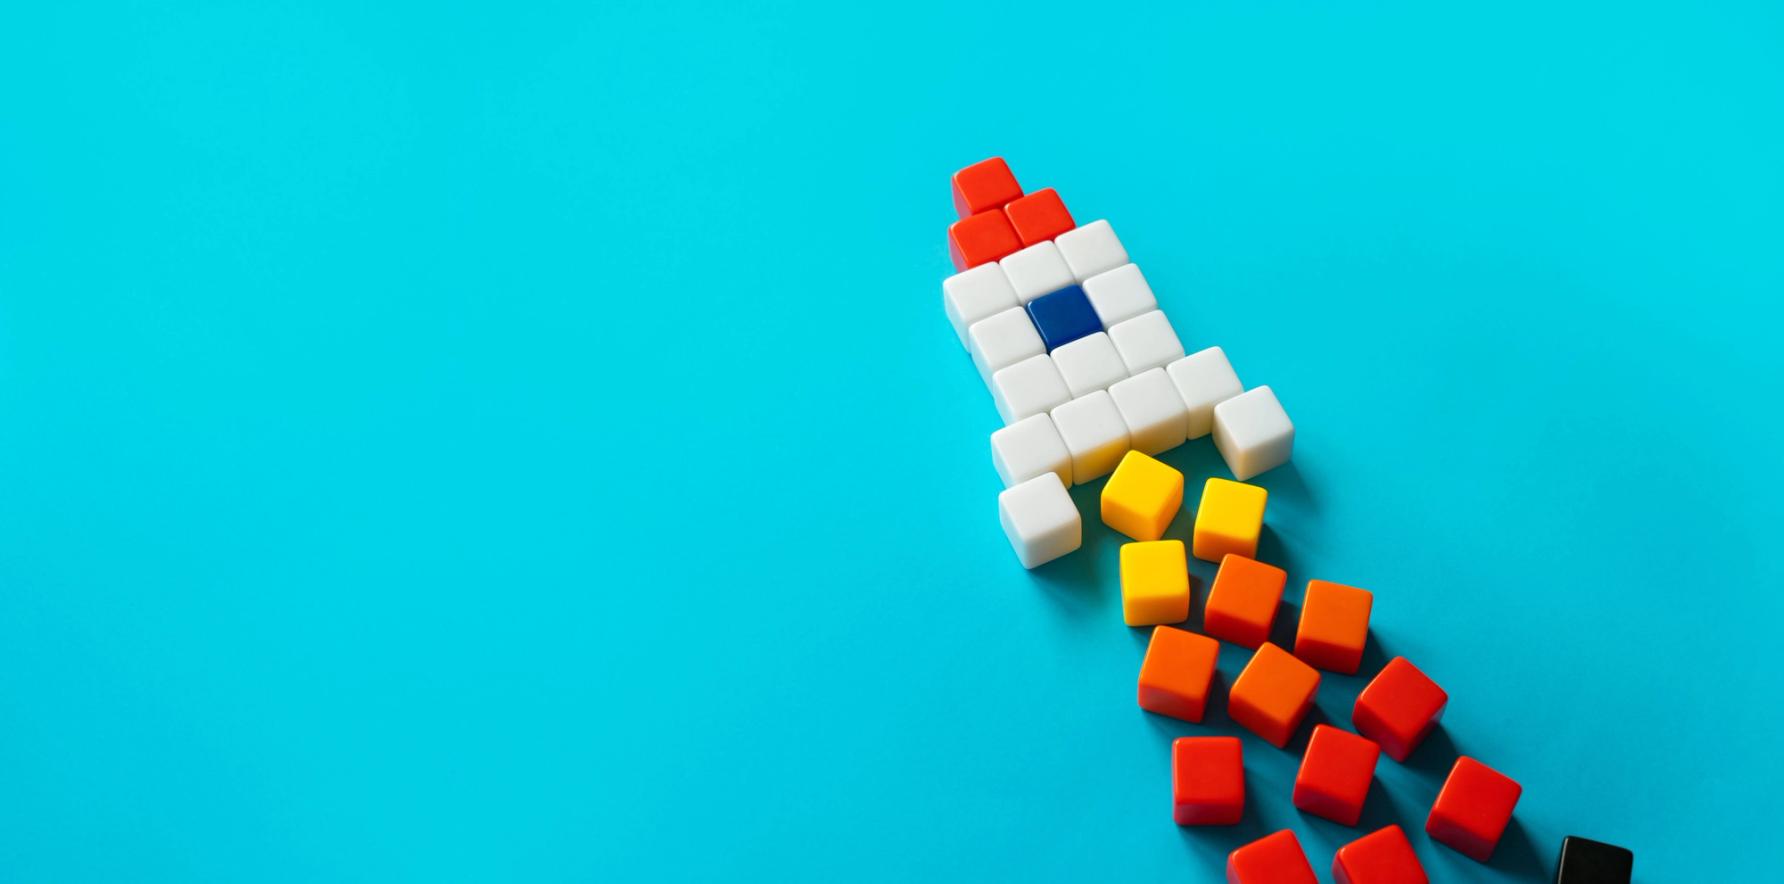 colored blocks in the shape of a rocket taking off